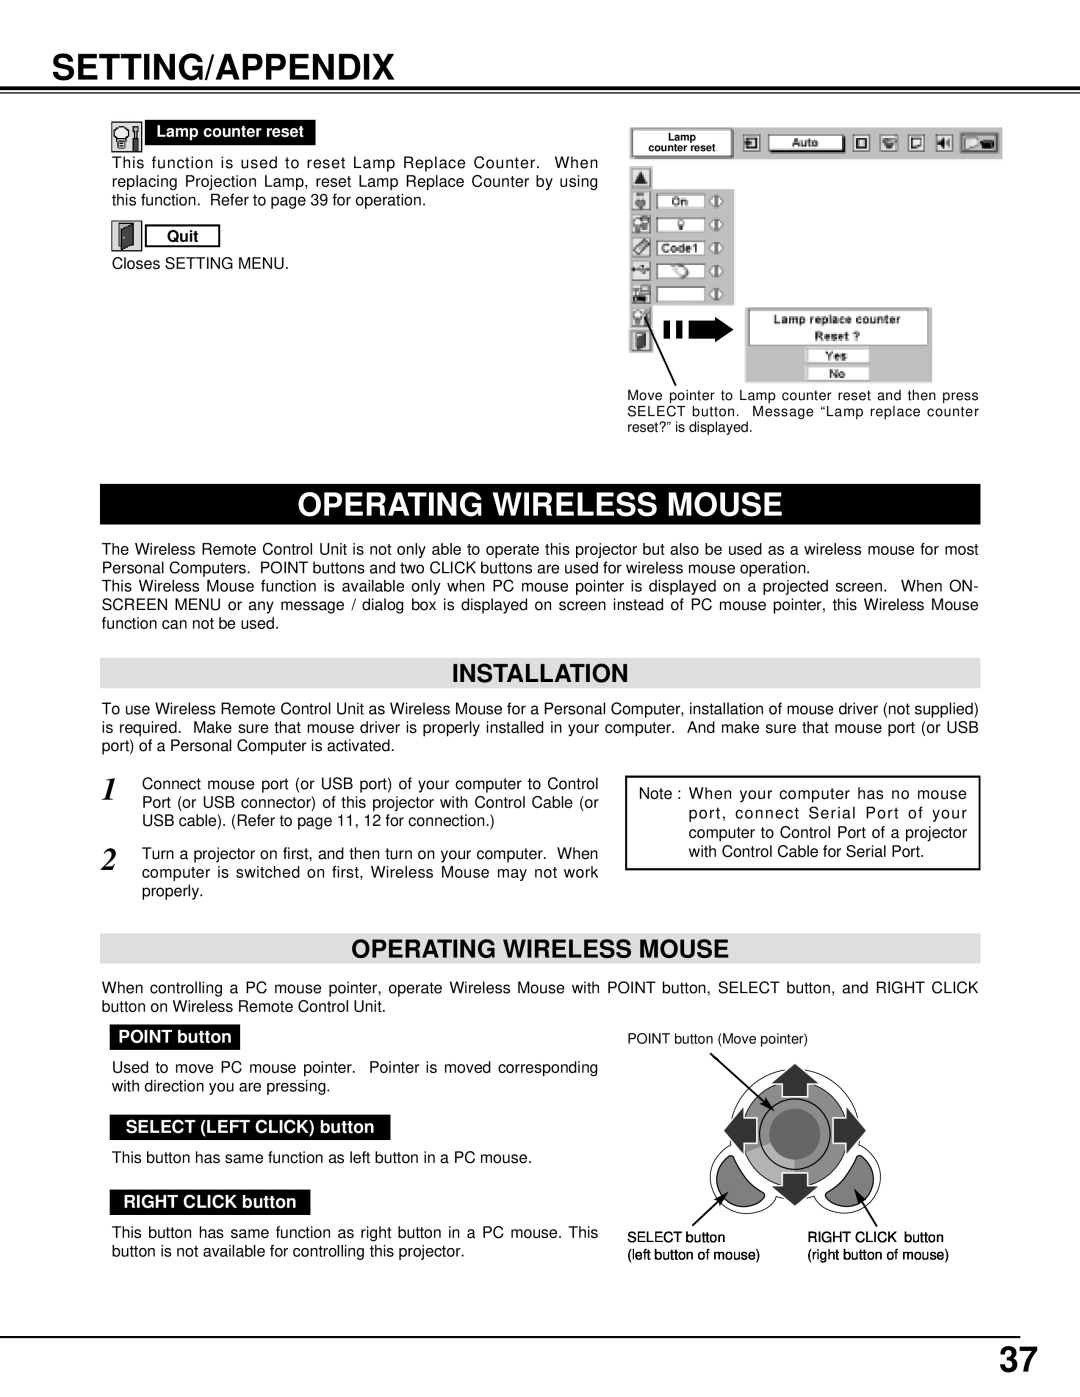 Christie Digital Systems 38-VIV205-01 user manual Setting/Appendix, Operating Wireless Mouse, Installation, Quit 